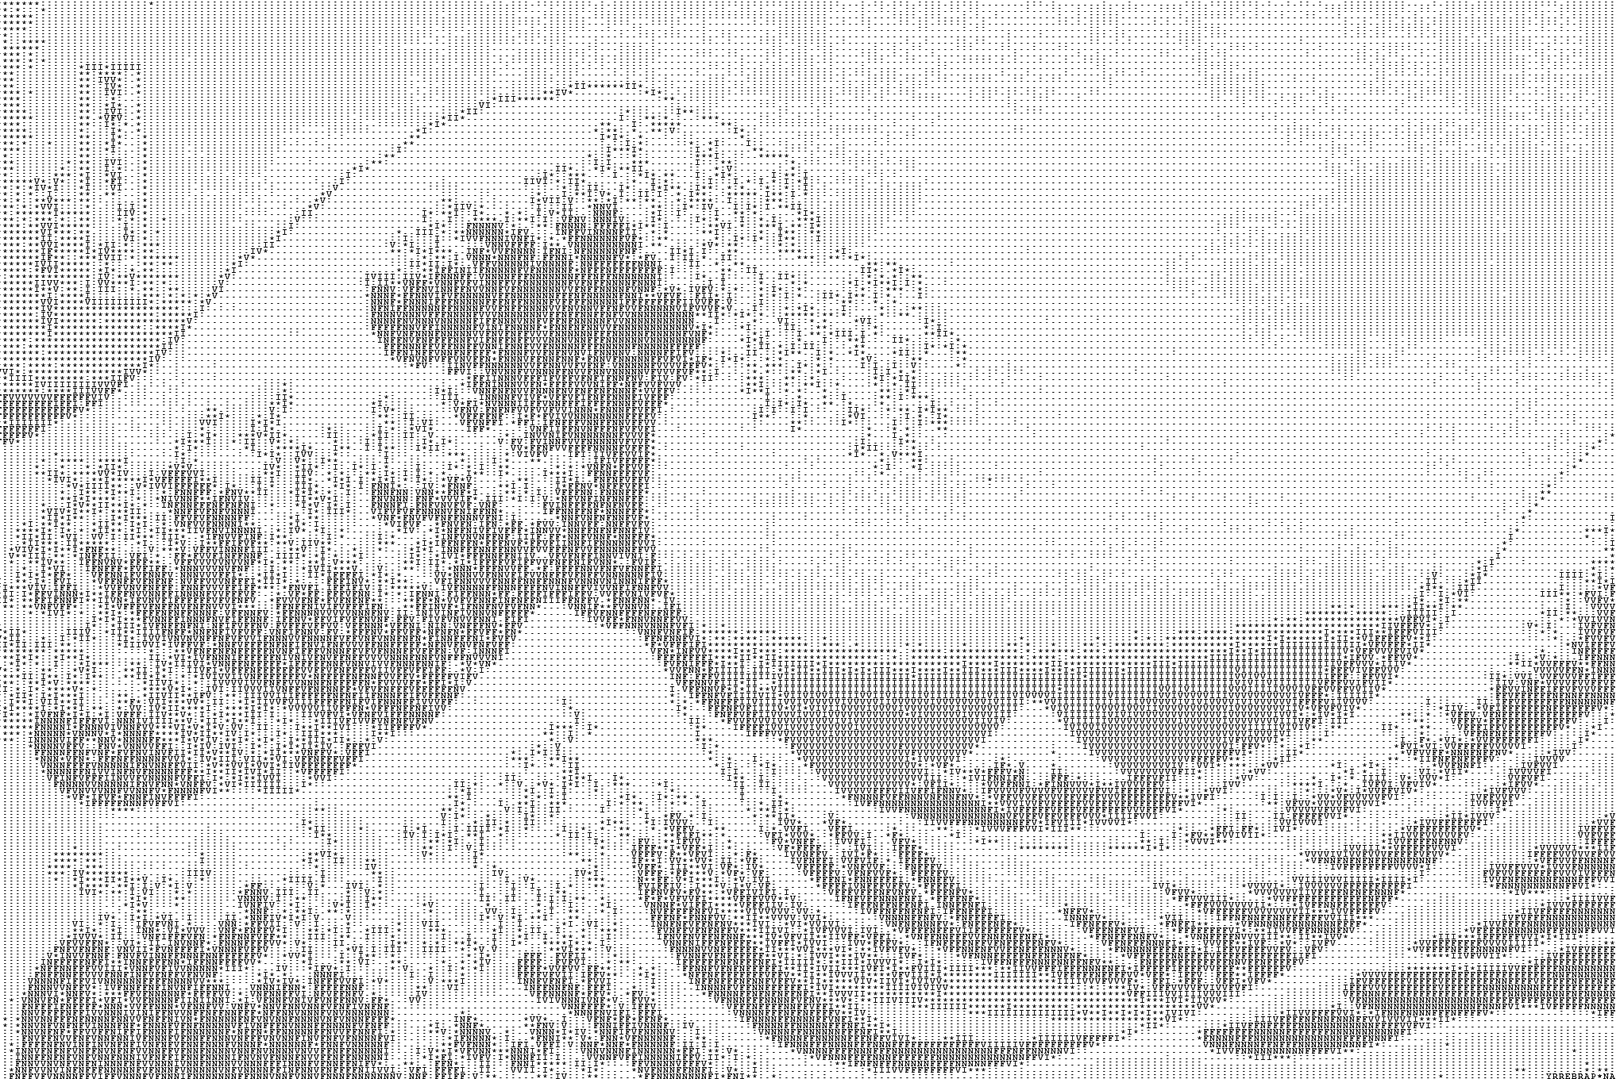 Example of intricate ASCII art depicting The Great Wave off Kanagawa